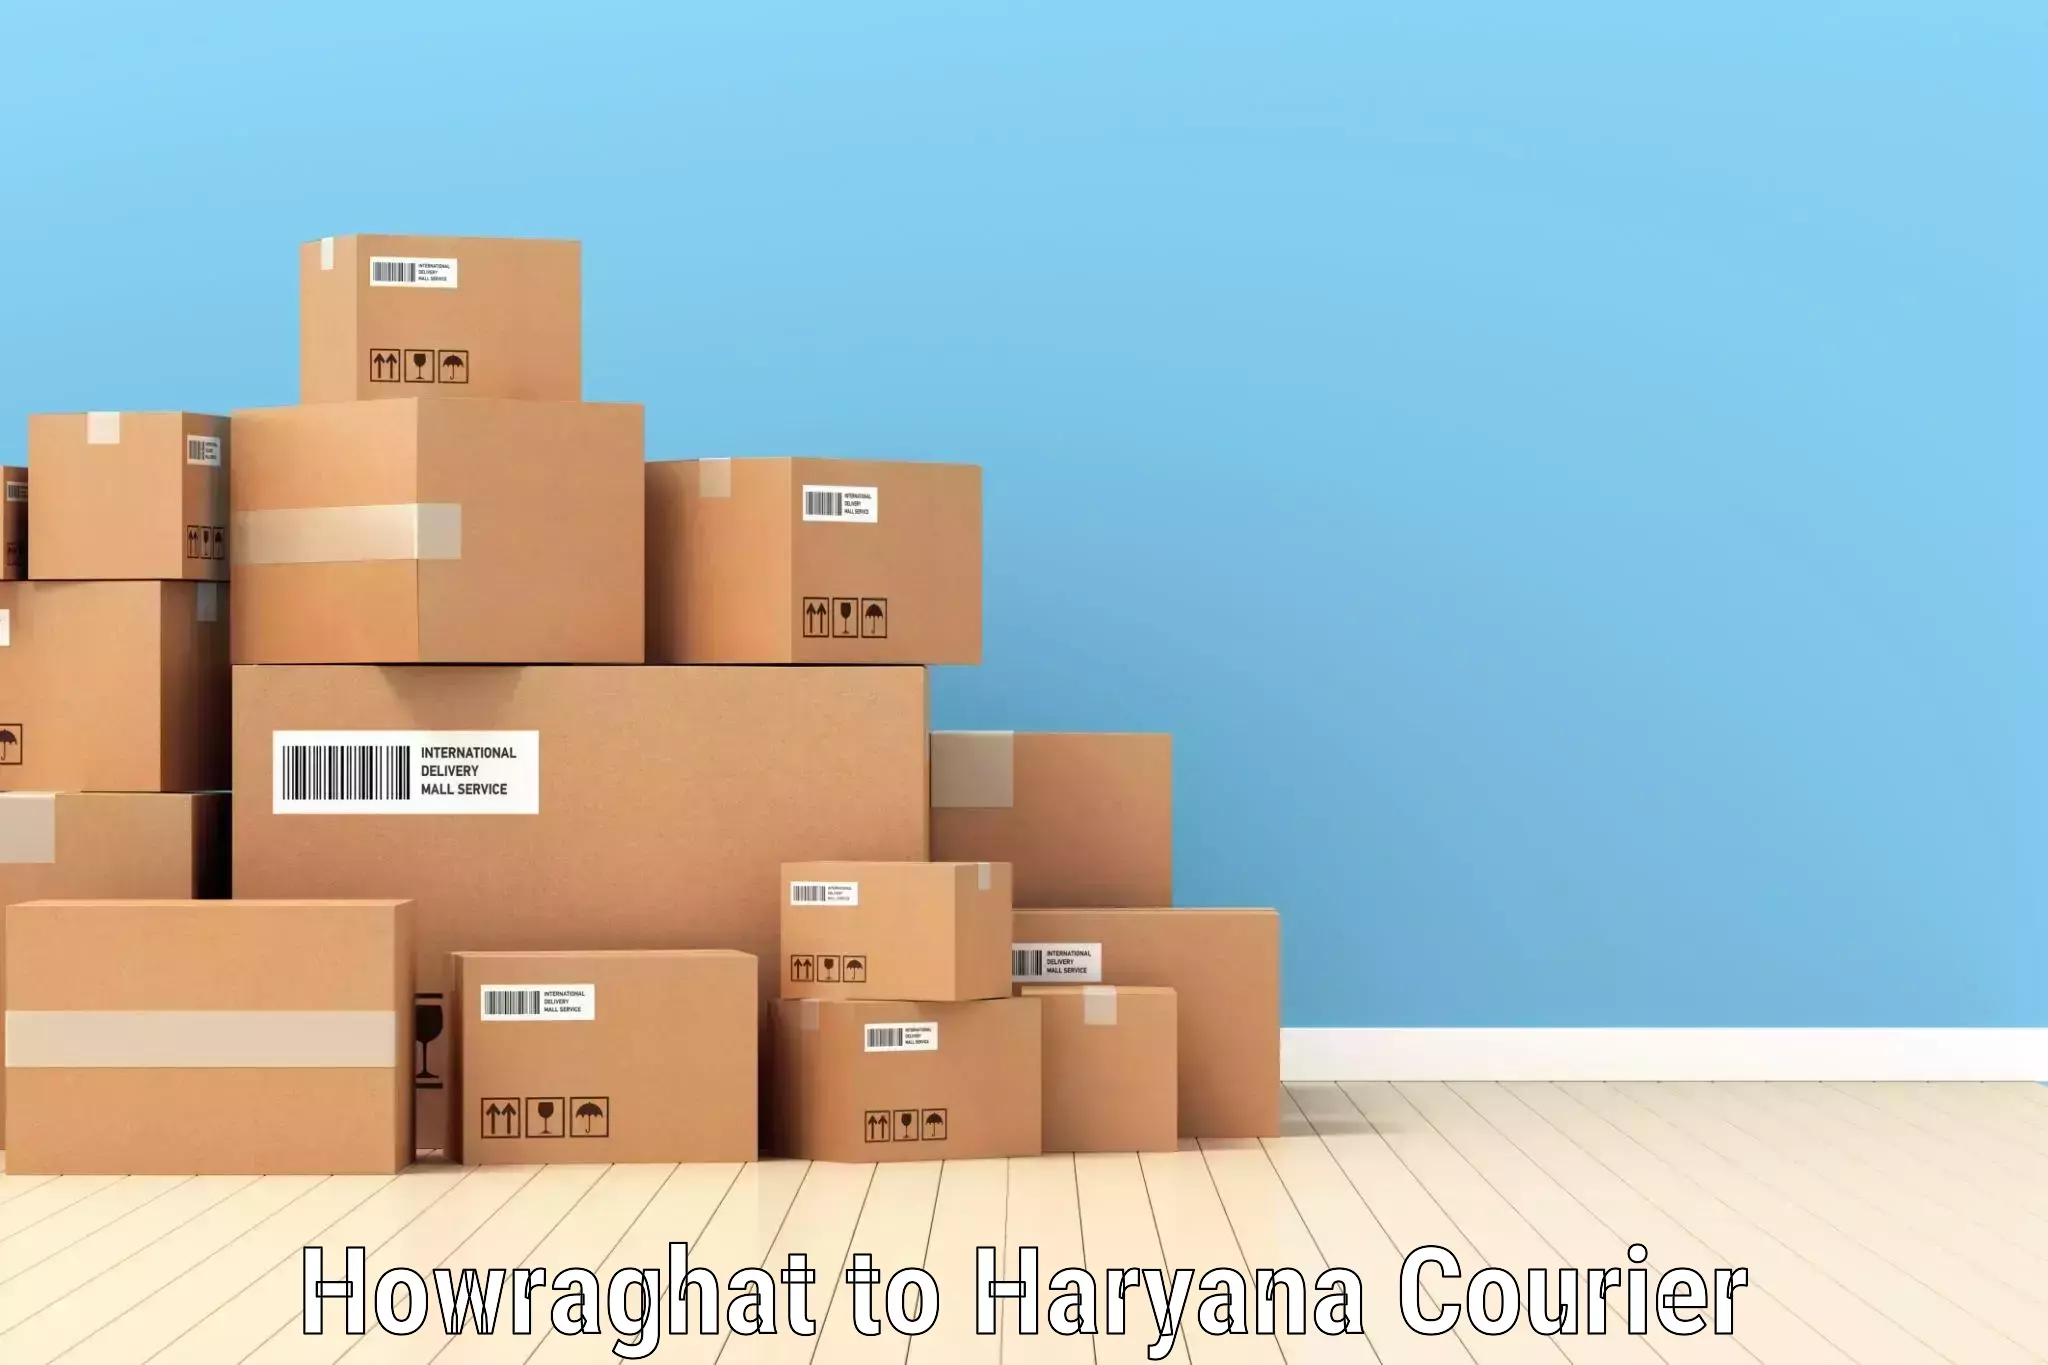 Comprehensive shipping network Howraghat to Julana